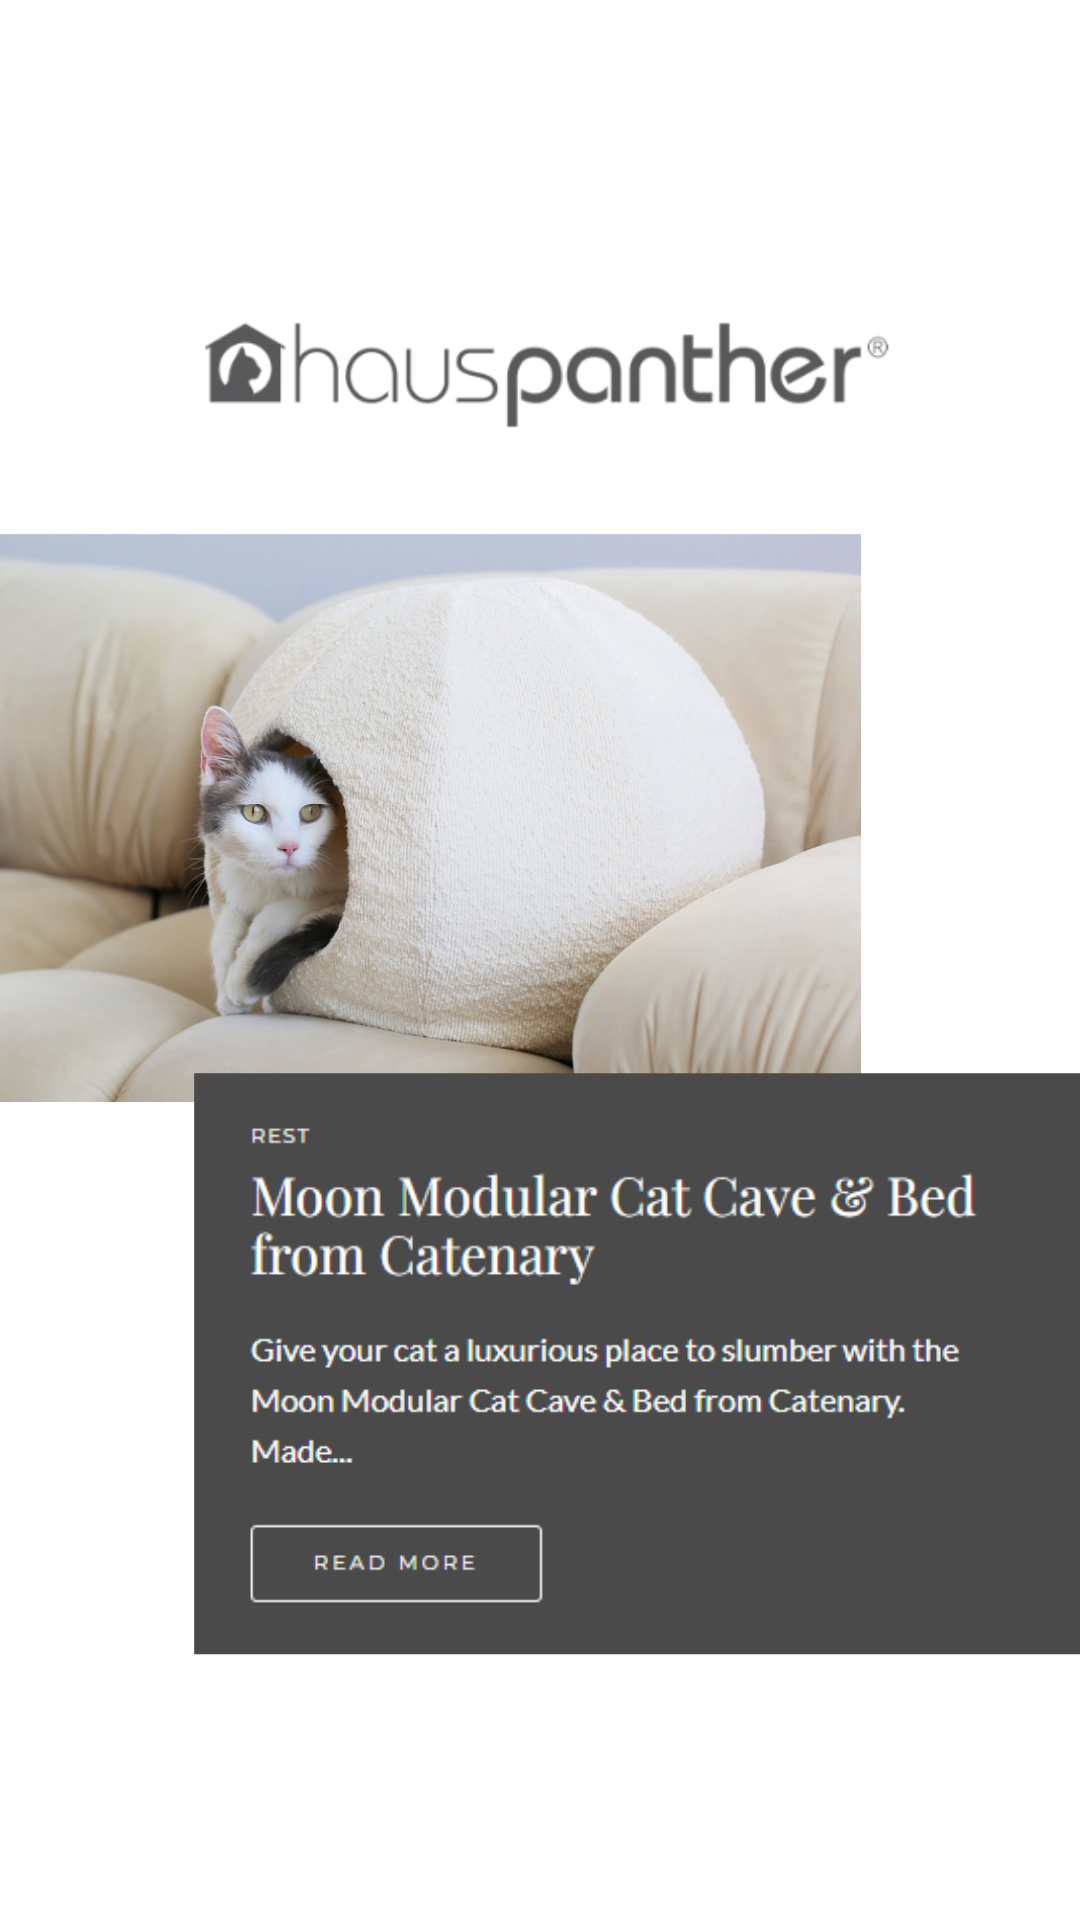 hauspanther featuring best cat bed cave called moon which is a modular cat cave bed by catenary